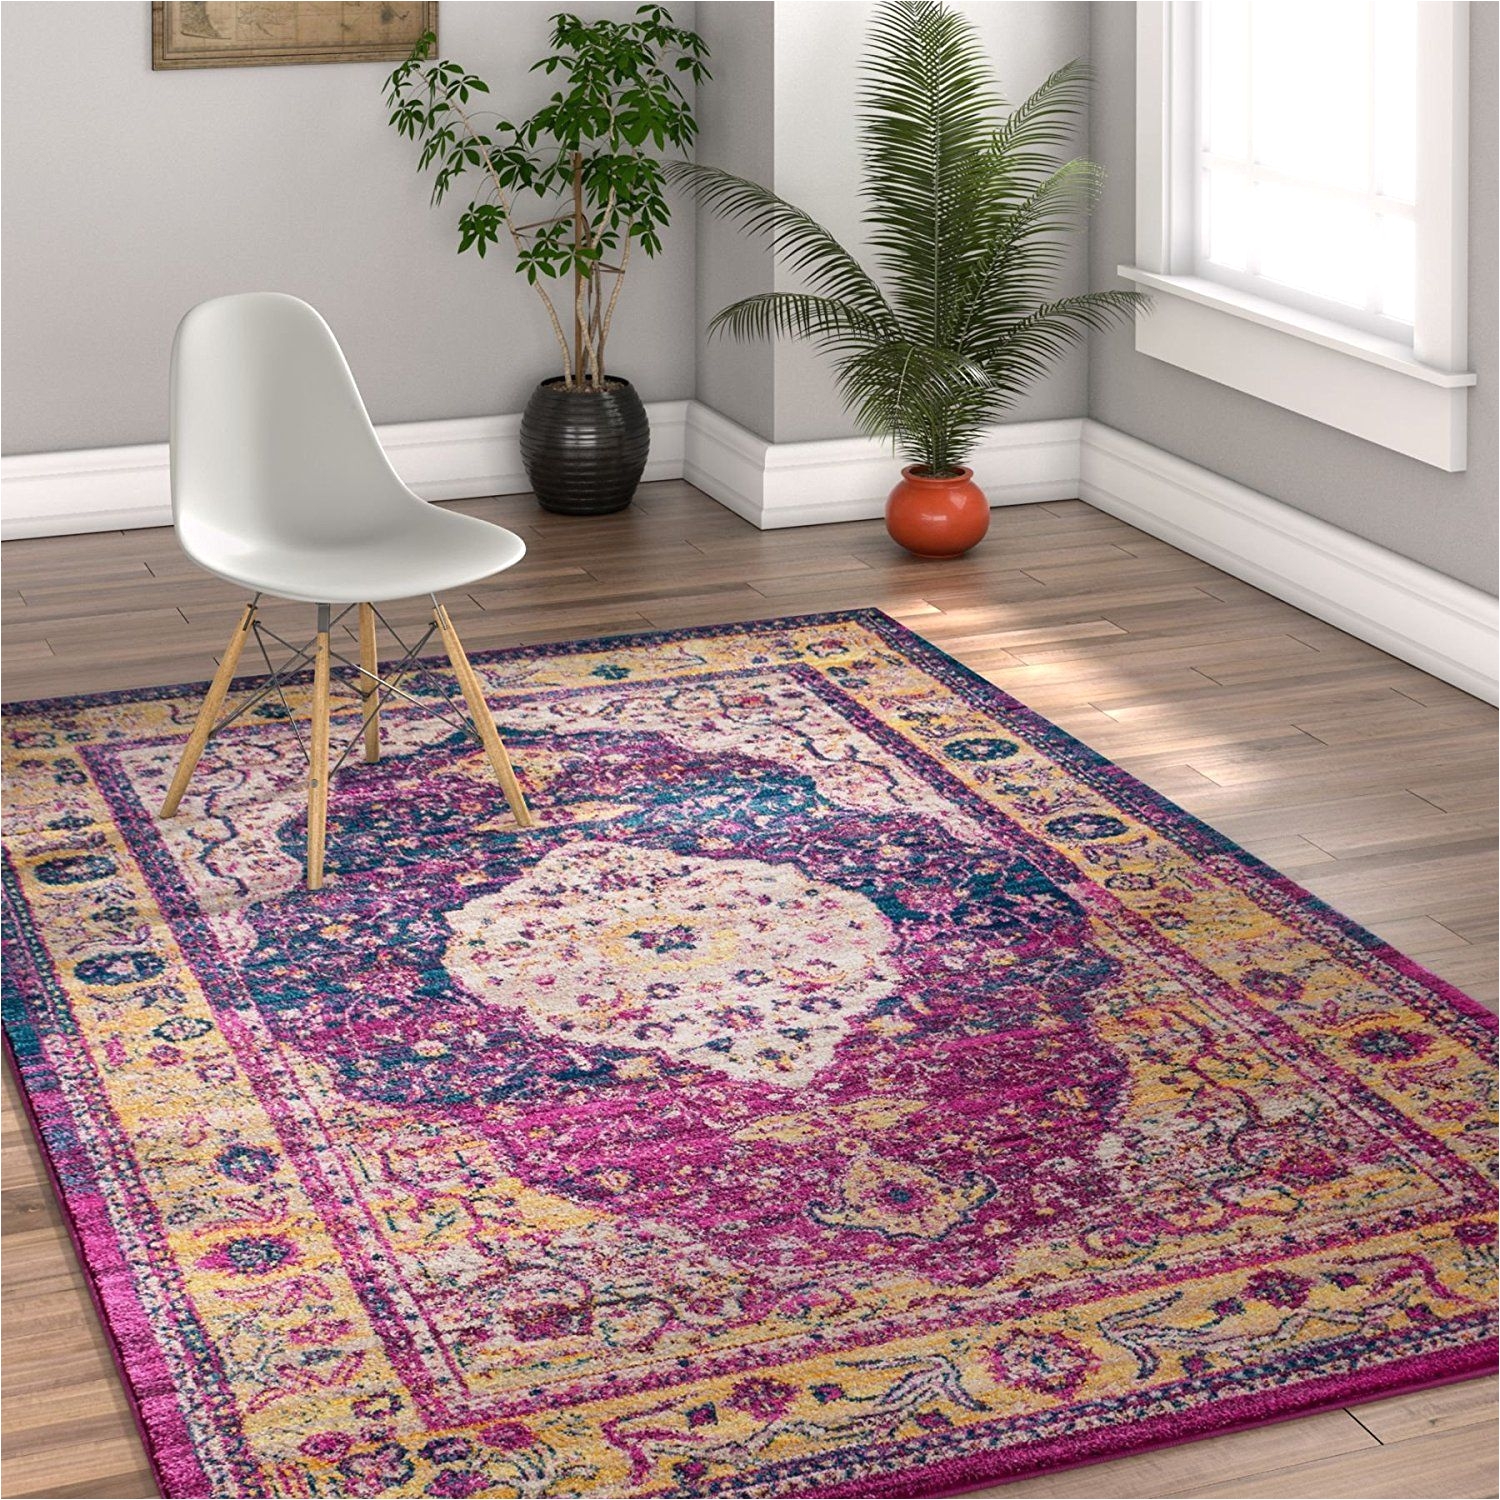 evoke vintage medallion bright multi color purple fuschia yellow gold 8x10 7 10 x 9 10 area rug new and awesome product awaits you